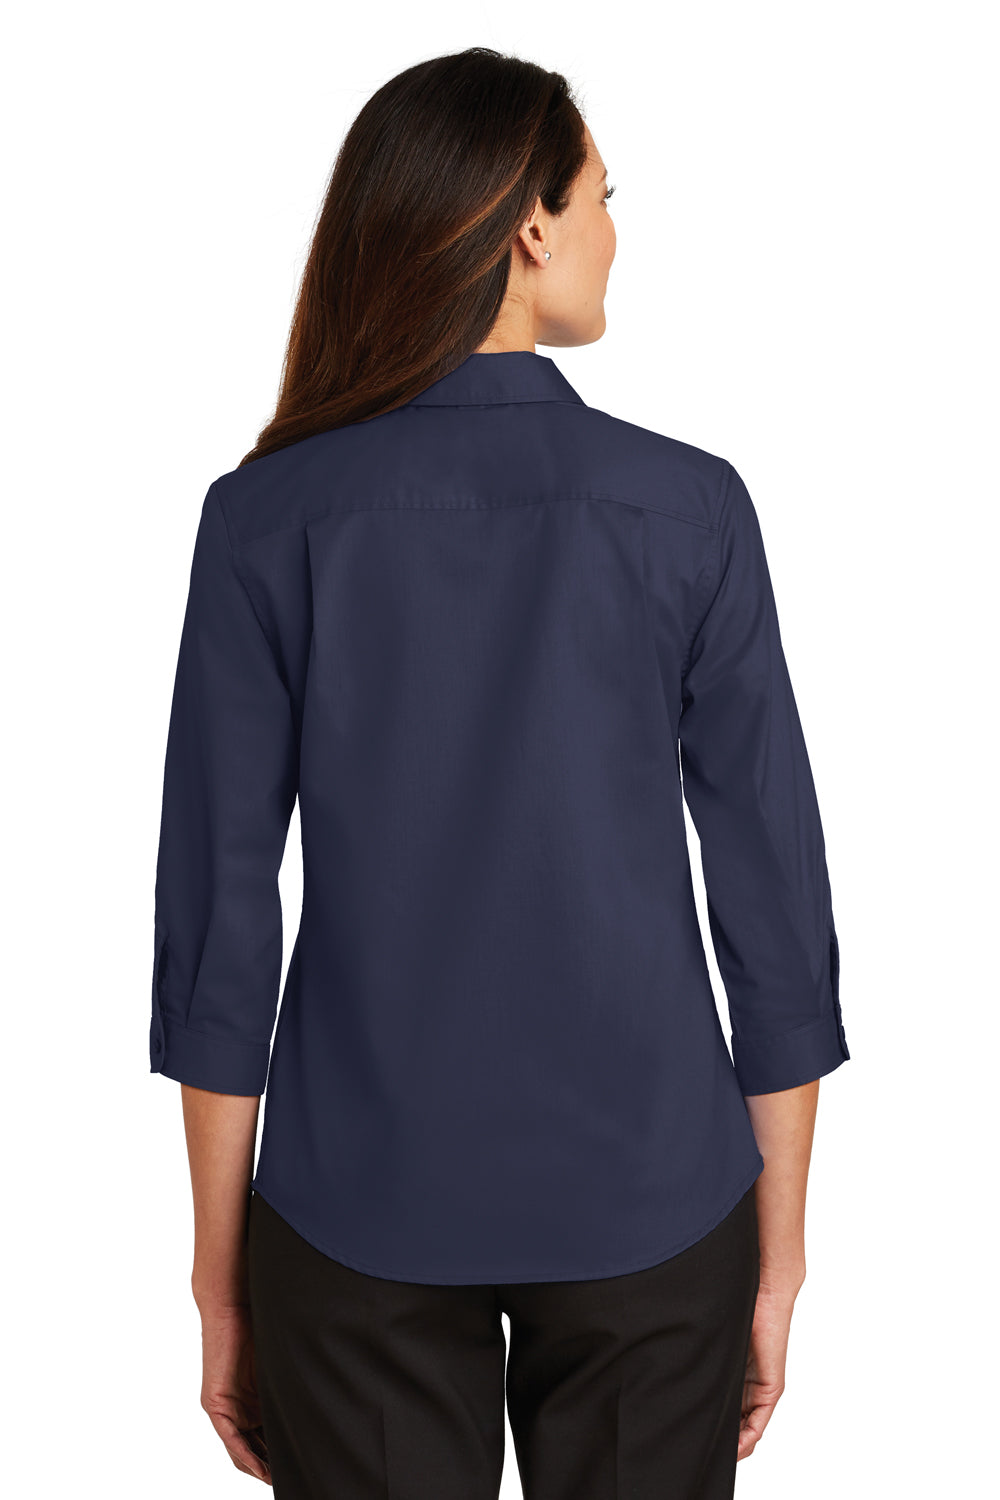 Port Authority L665 Womens SuperPro Wrinkle Resistant 3/4 Sleeve Button Down Shirt Navy Blue Back